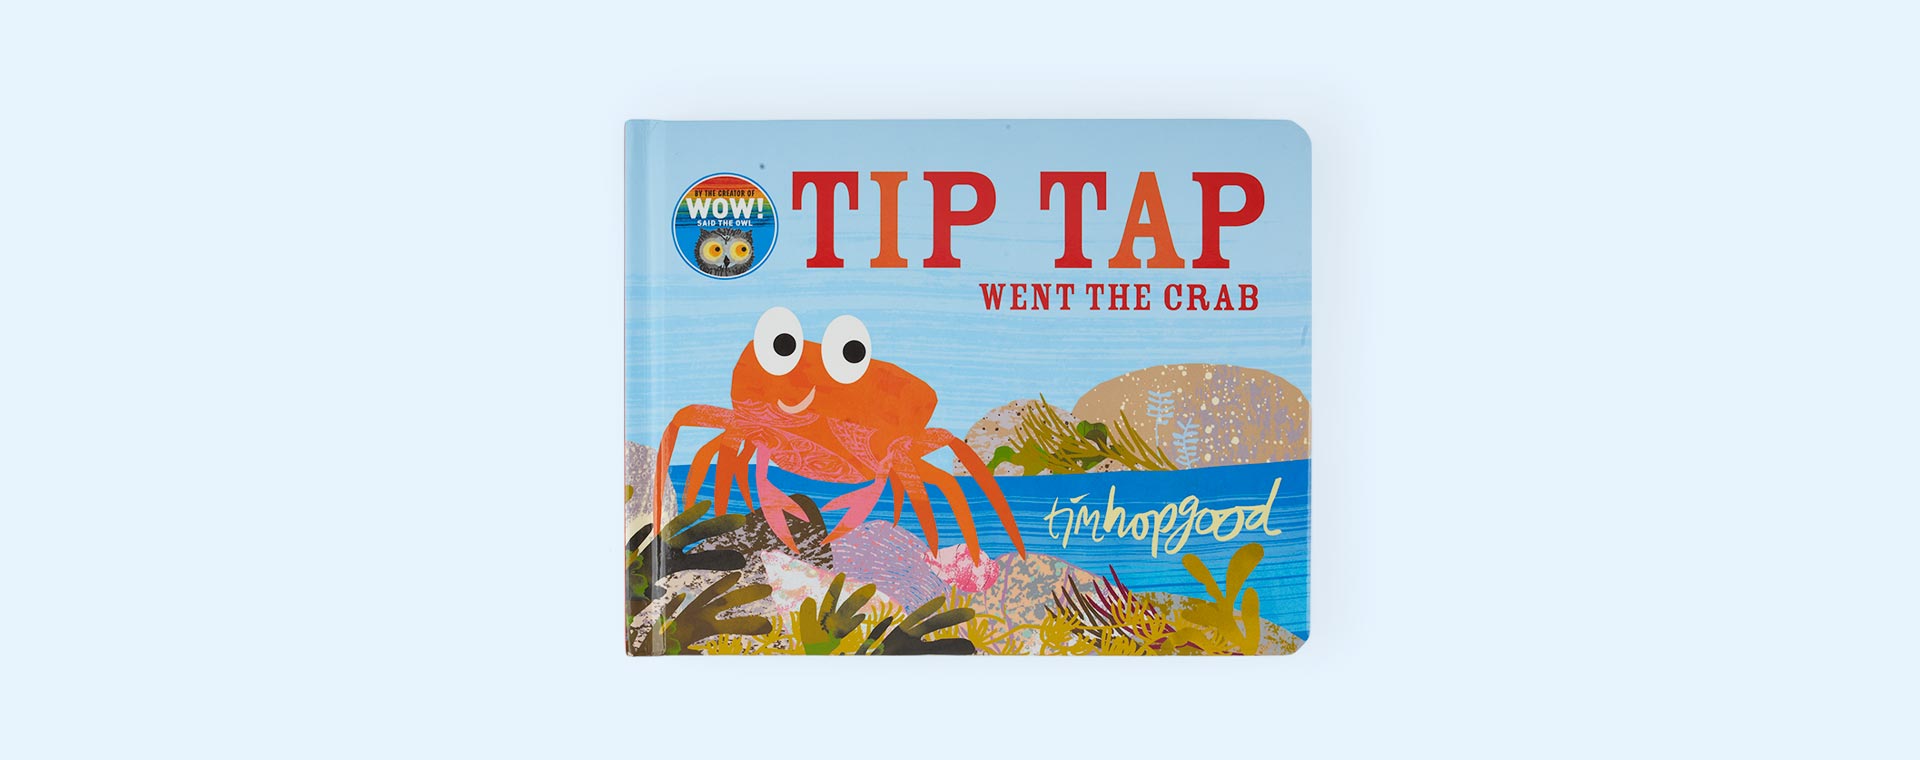 Tip Tap went the crab bookspeed Tip Tap Went The Crab